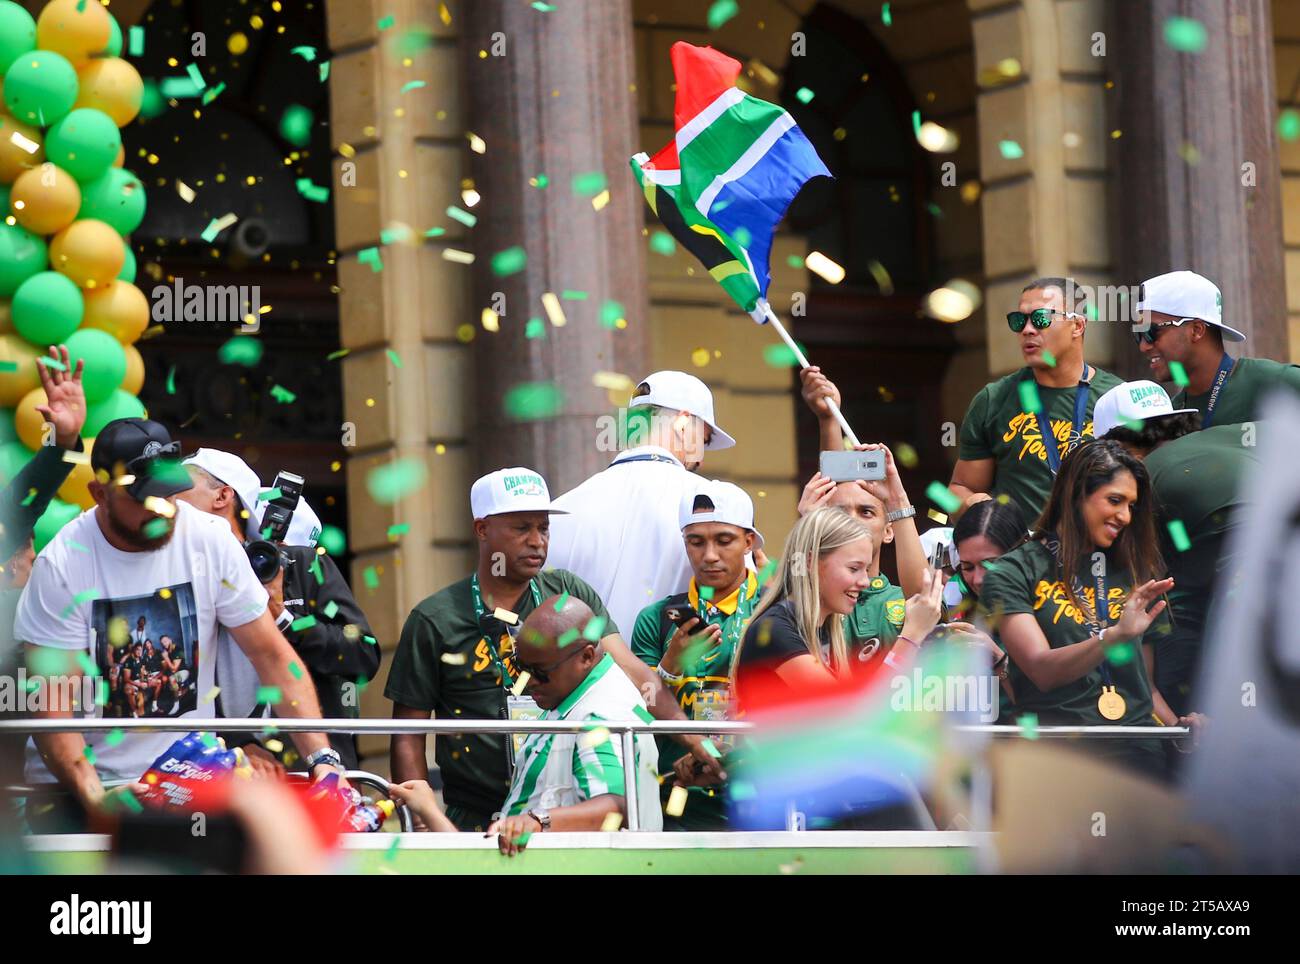 CAPE TOWN, SOUTH AFRICA - NOVEMBER 03: Cheslin Kolbe, right, on top of the bus during the Springbok Trophy tour in Cape Town on November 03, 2023 in Cape Town, South Africa. The Springboks beat the New Zealand All Blacks 12-11 to win the Rugby World Cup in Paris, France on Saturday 28 October 2023. (Photo by Roger Sedres) Stock Photo